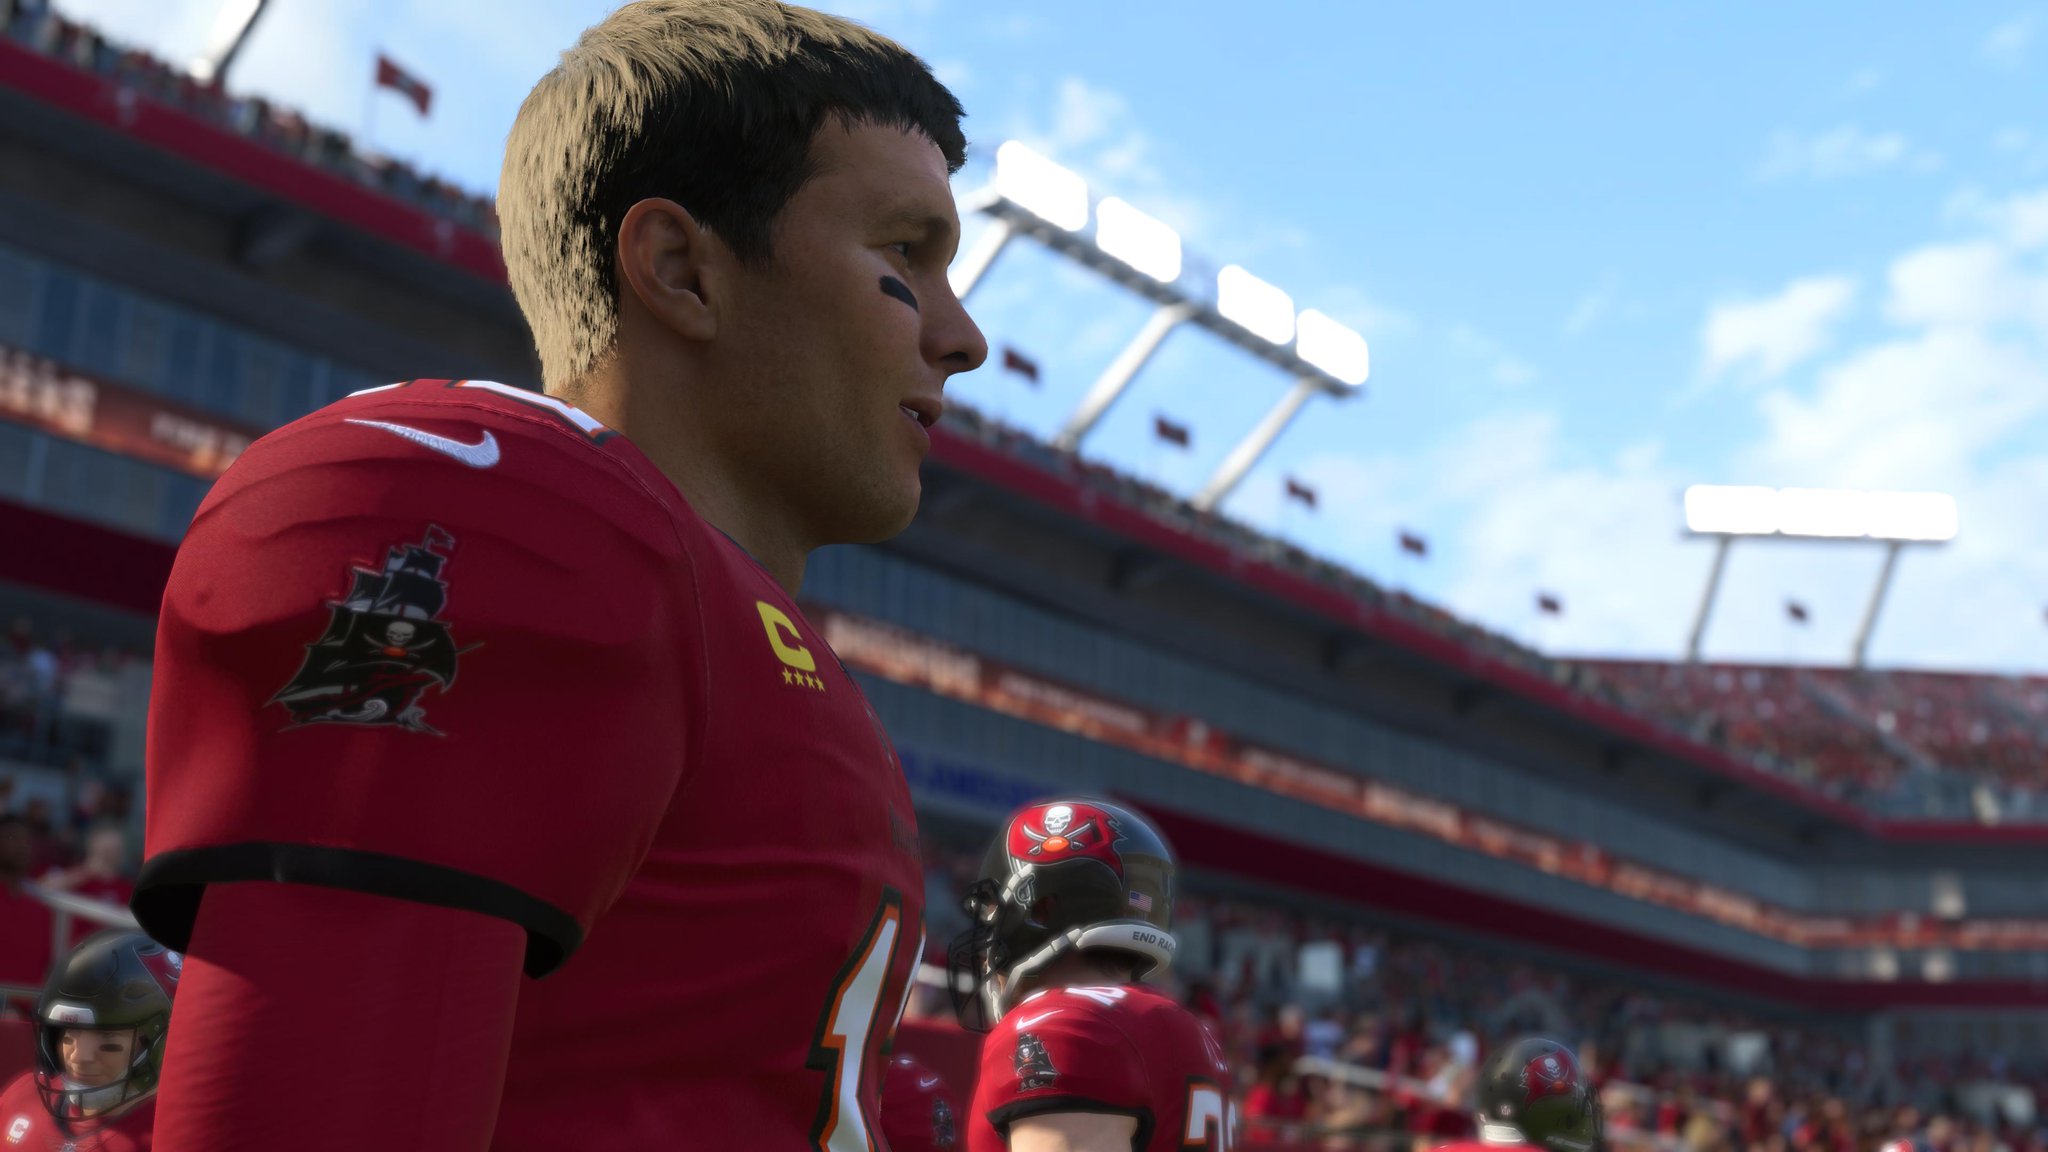 Madden NFL 22 Roster Update For Week 5 Available - See Changes Here